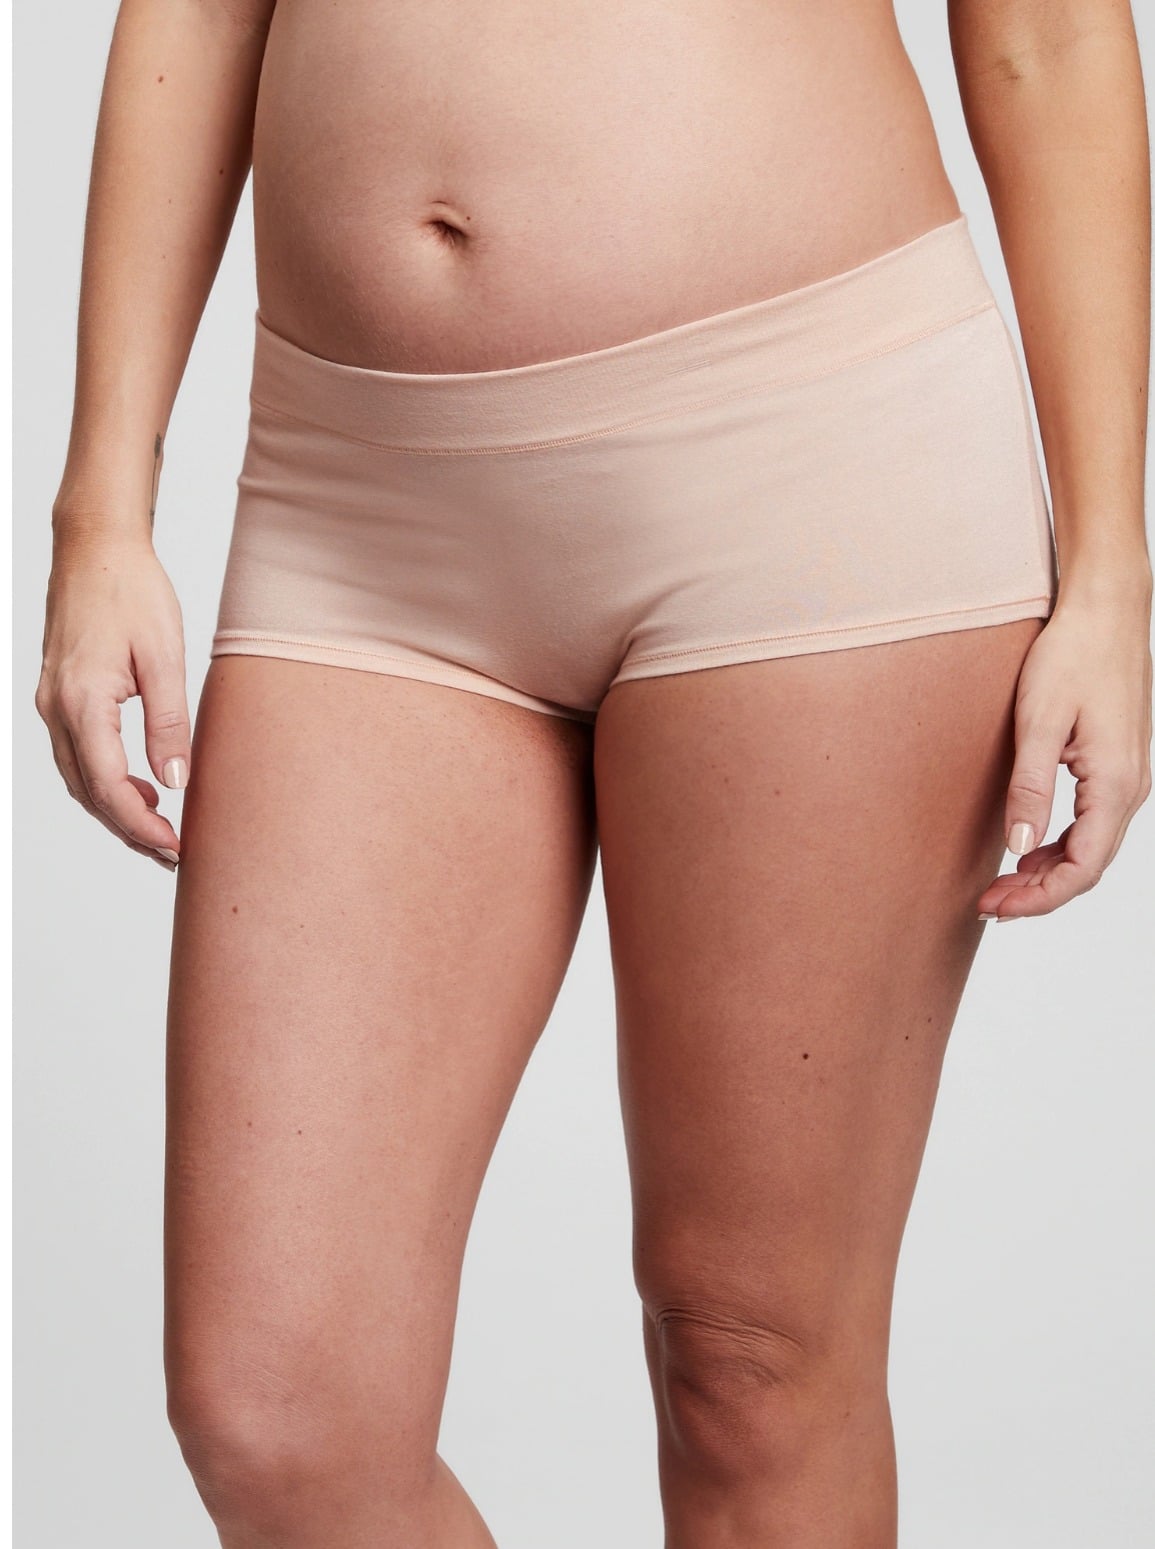 Best Maternity Underwear for Every Stage - Today's Parent